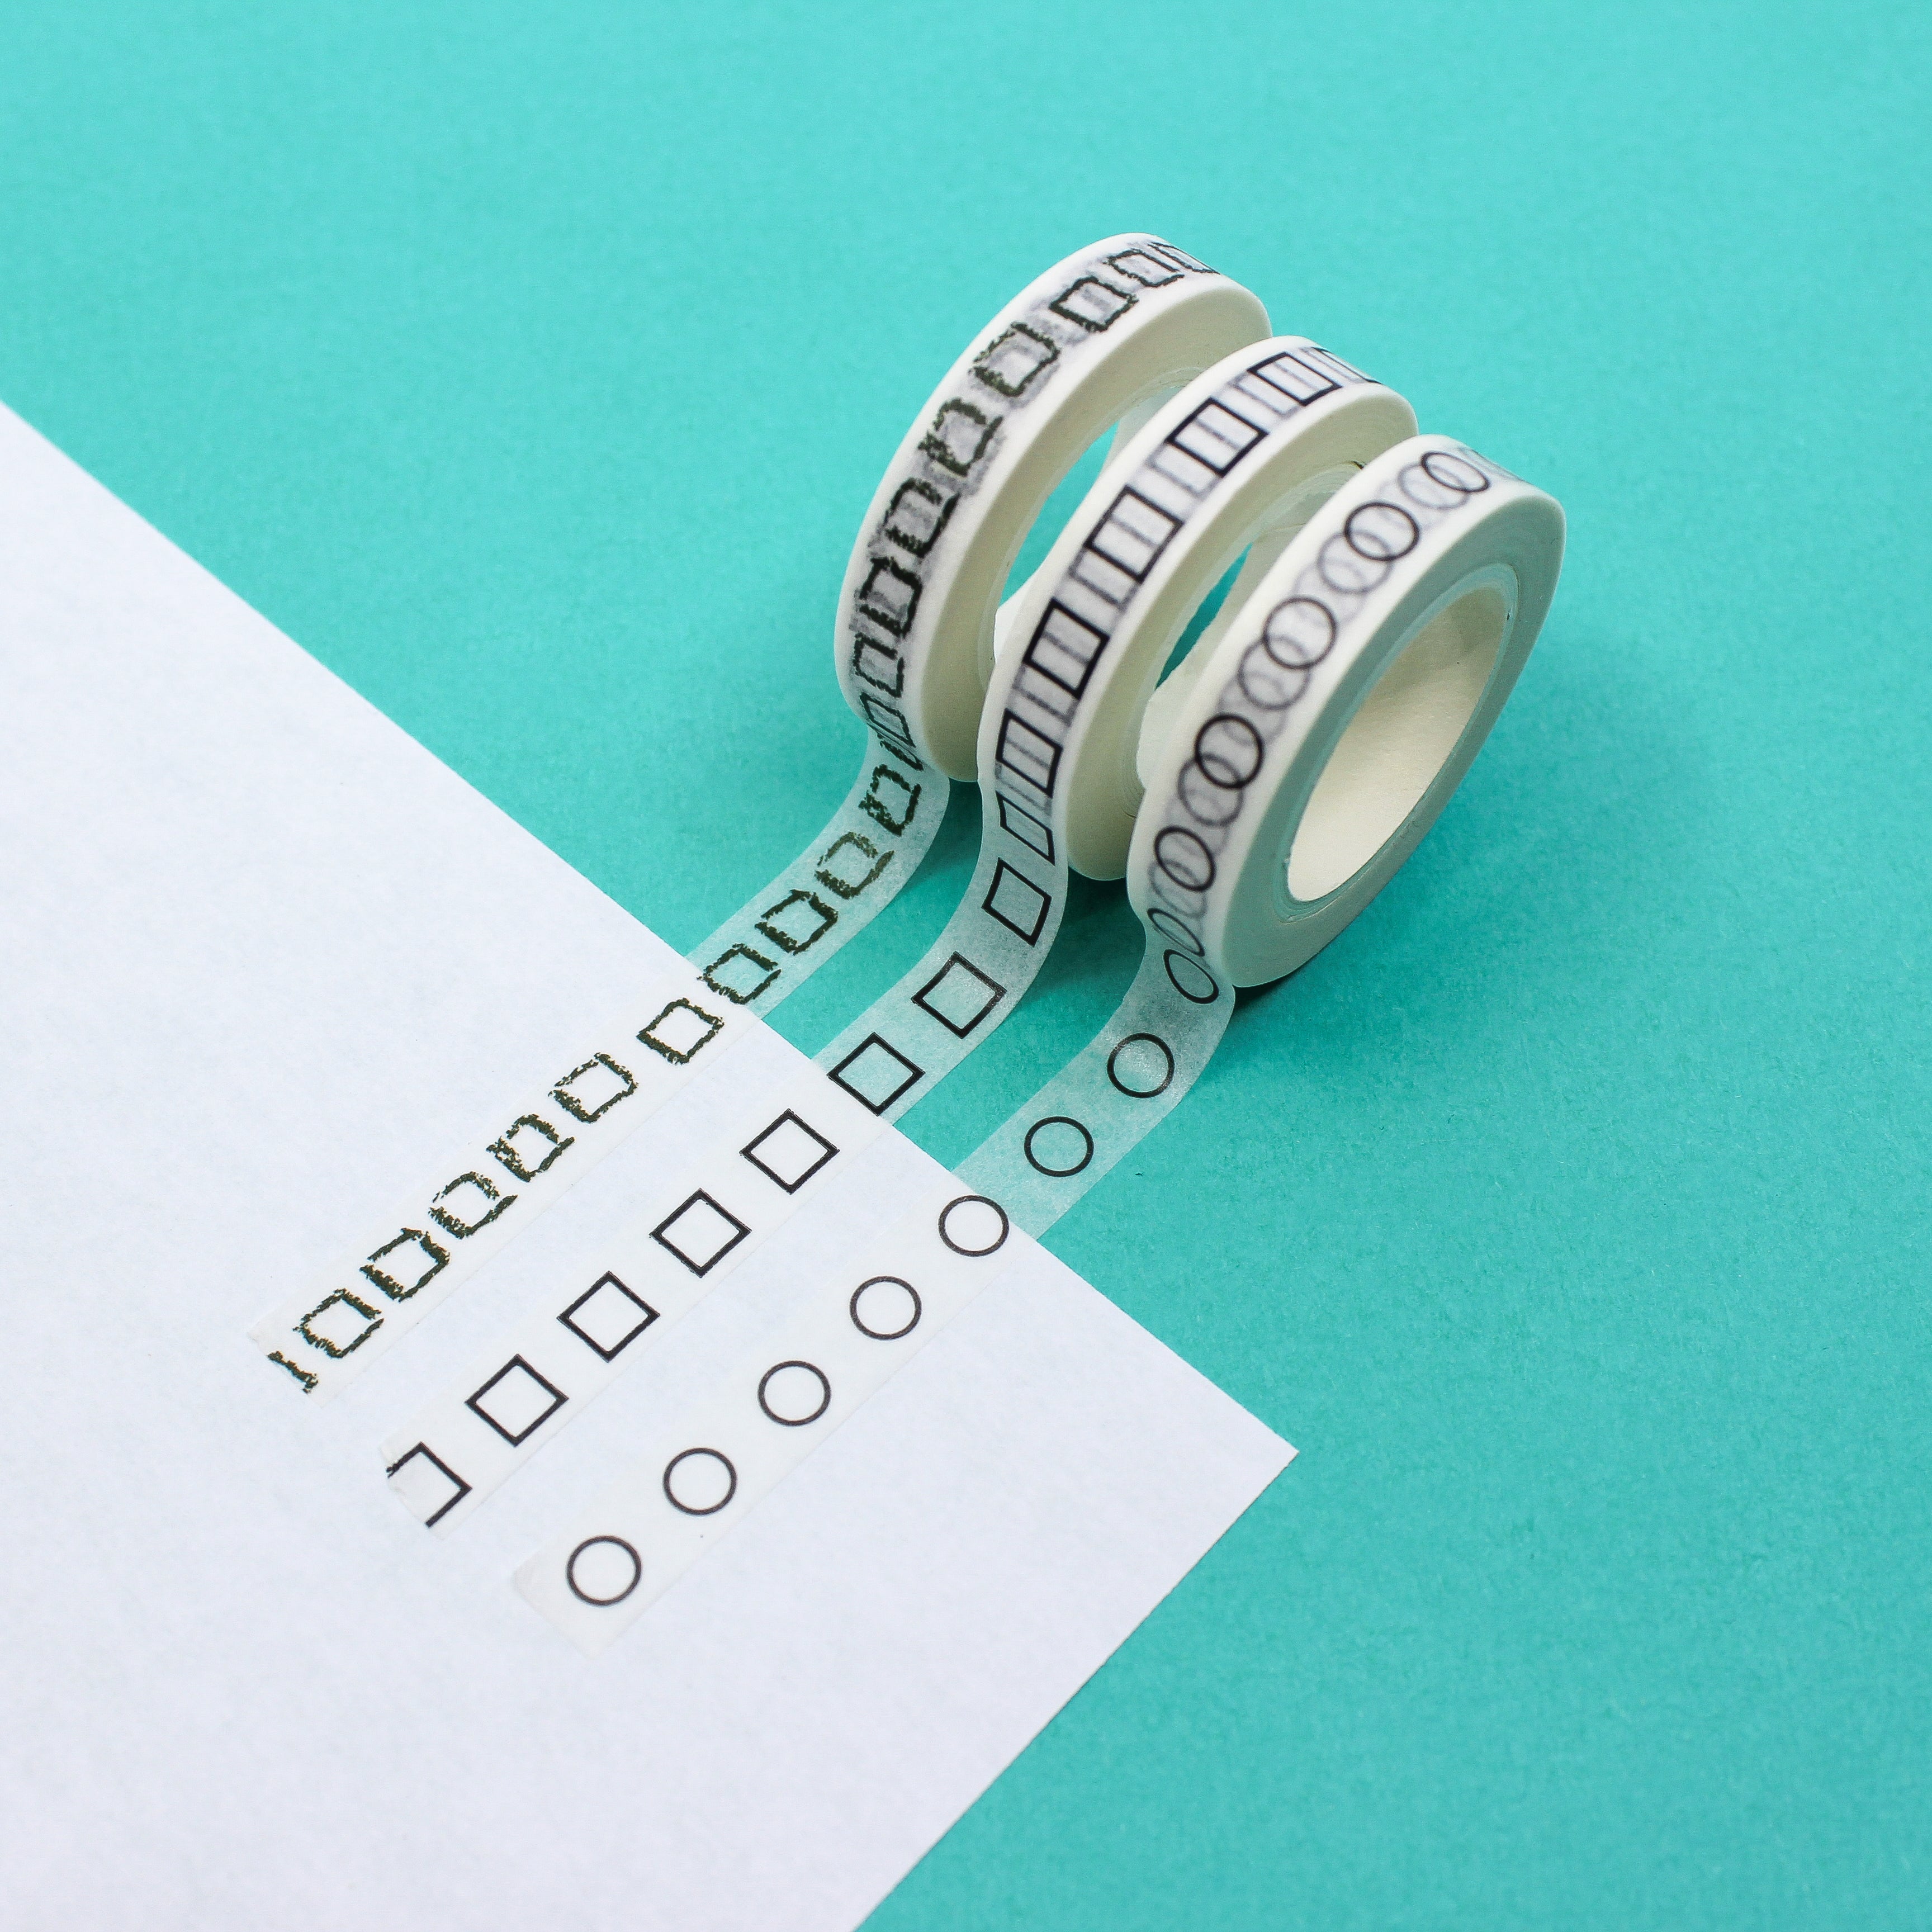 This is a photo of BBB Supplies Check list washi tape collection which includes a circle check mark, a square check box, and a handdrawn box for a check list.